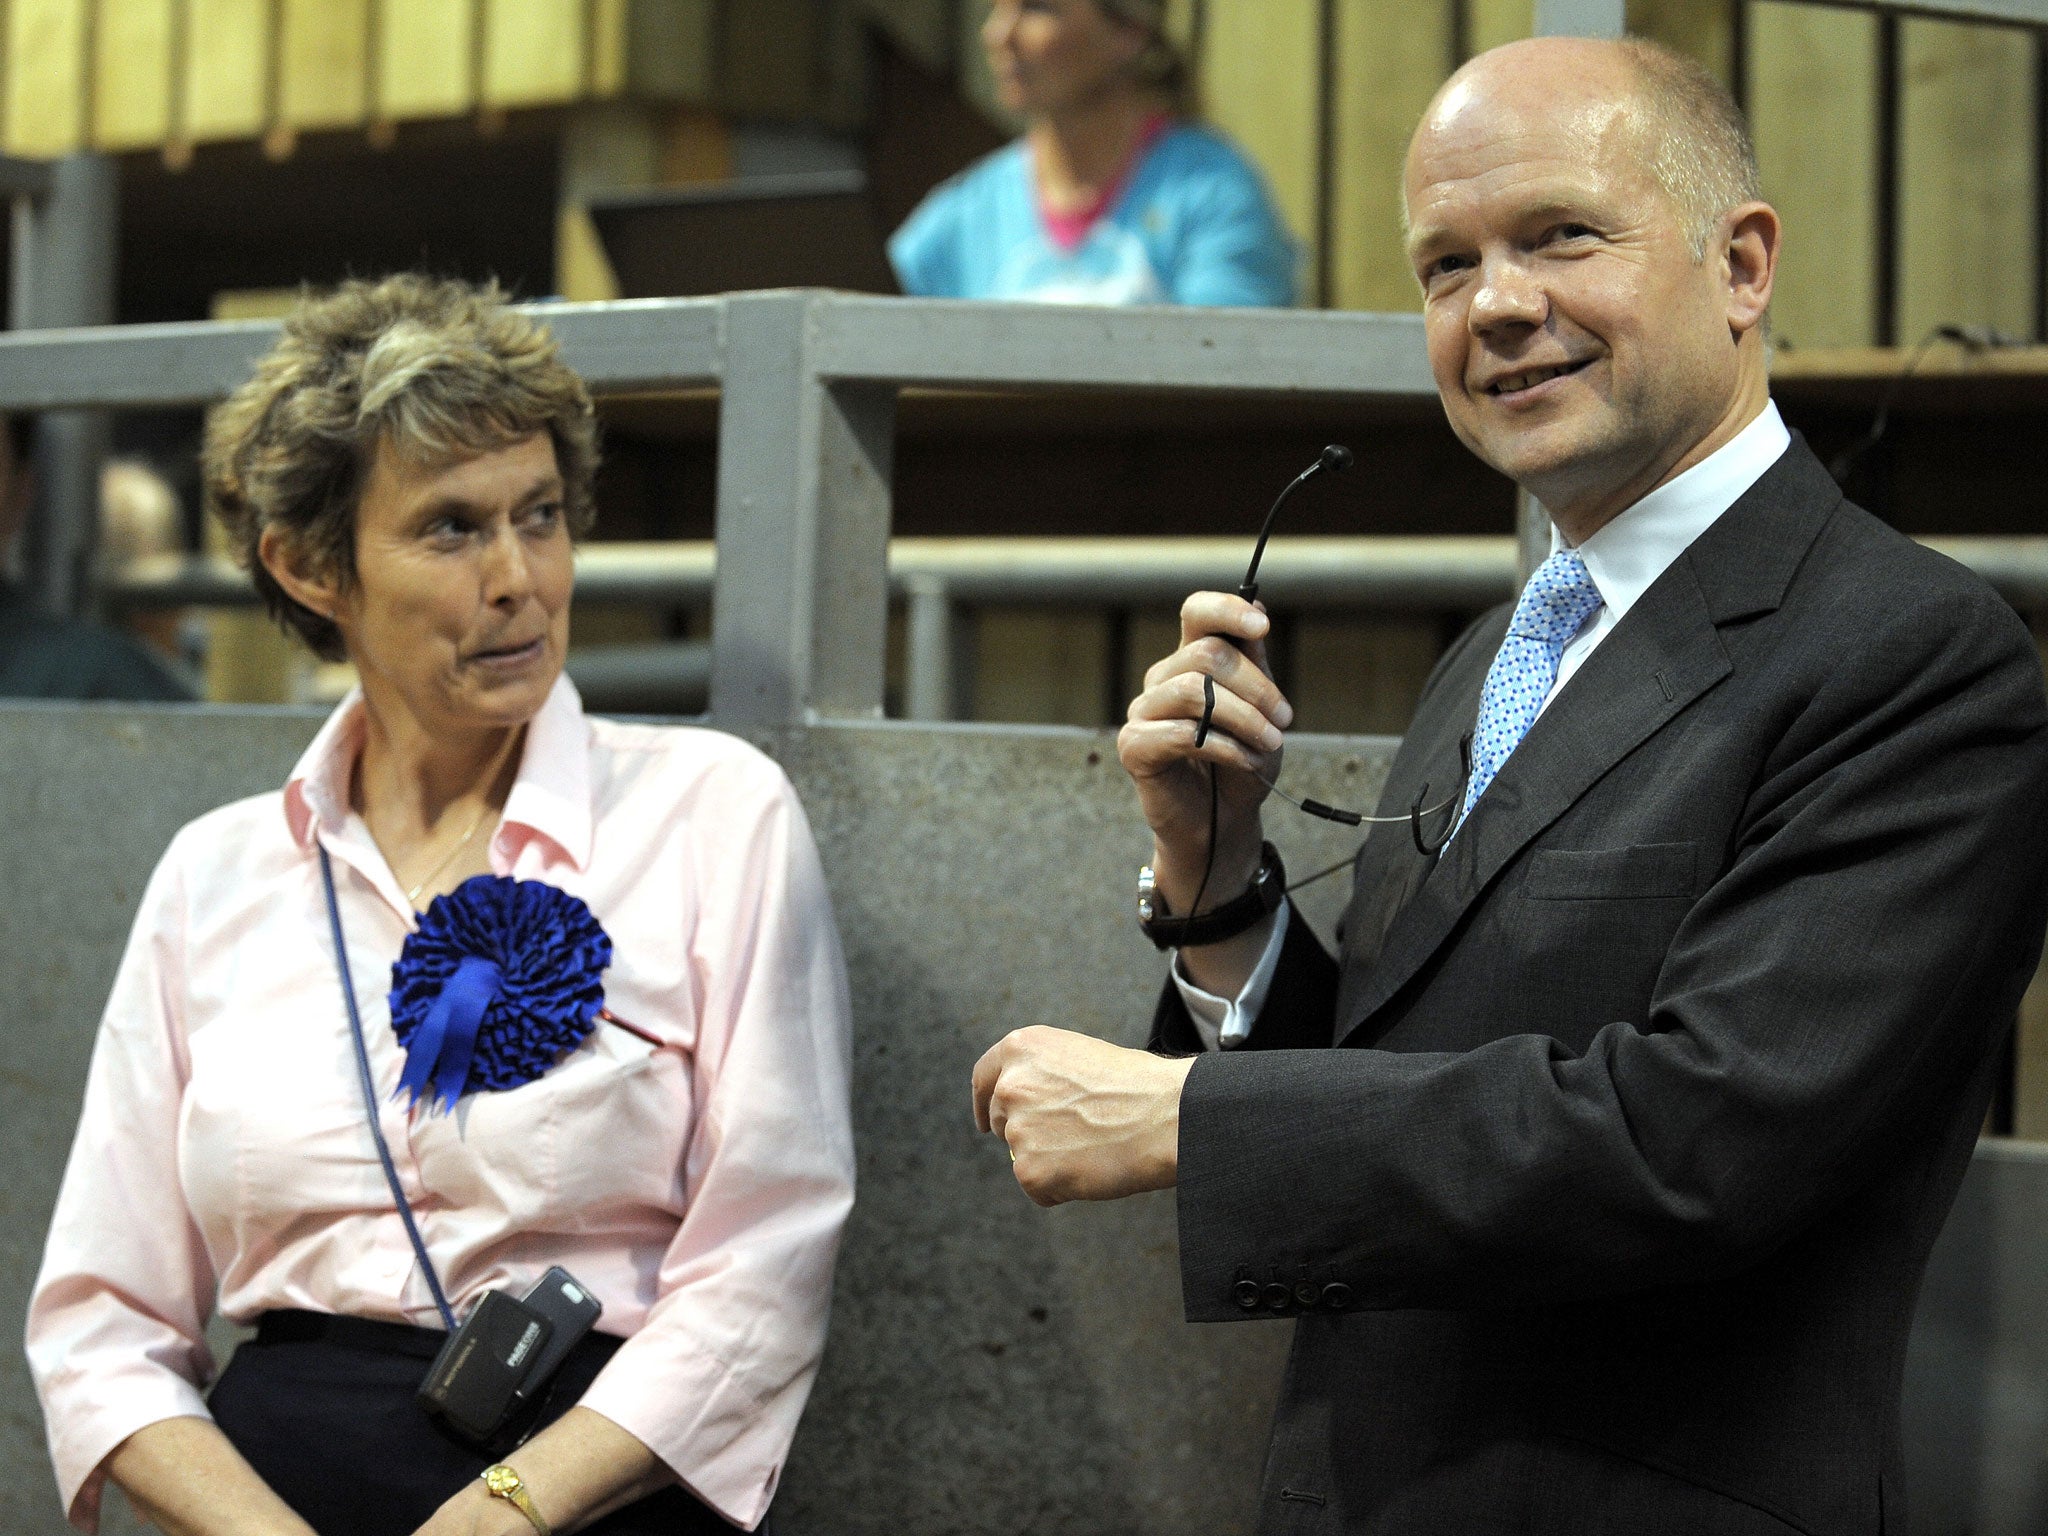 Ms McIntosh, pictured here in 2010 with William Hague, is one of only three women to represent the Conservative Party in the north of England